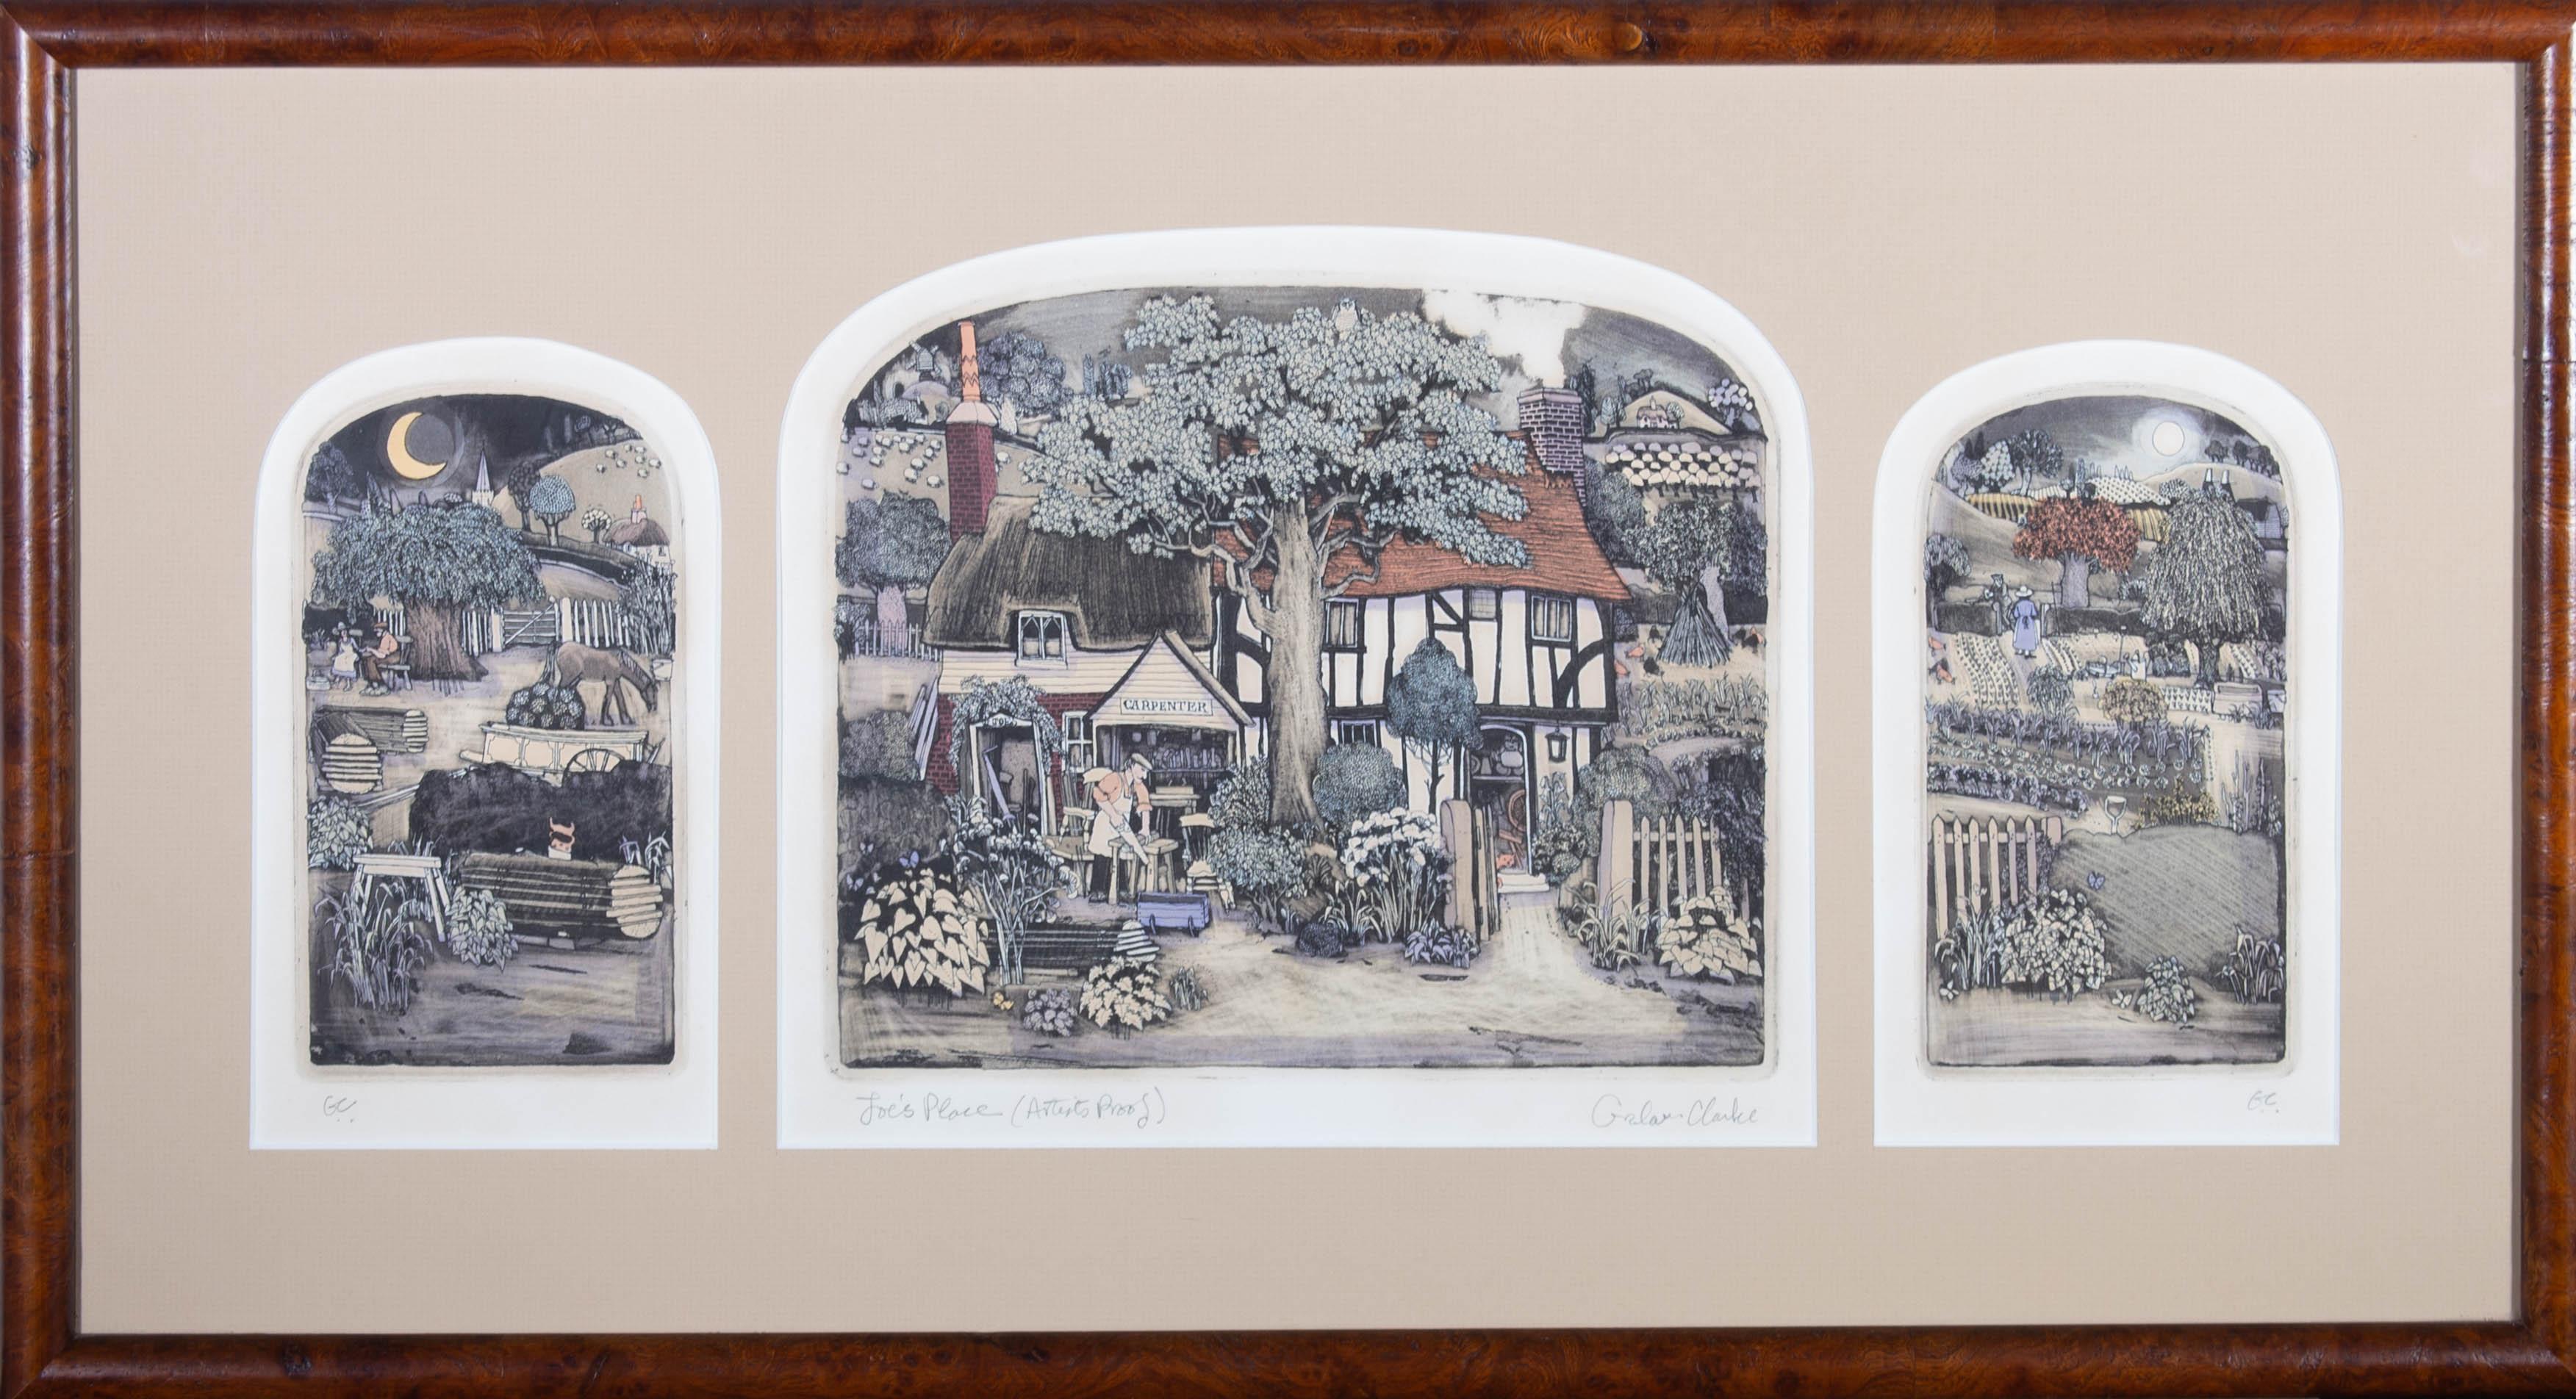 A fun and charmingly naive etching in colour by the notable British printmaker, Graham Clarke. This jolly triptych shows the carpenter's cottage and workshop of "Joe," at night, with garden scenes on either side. The middle panel has been signed and